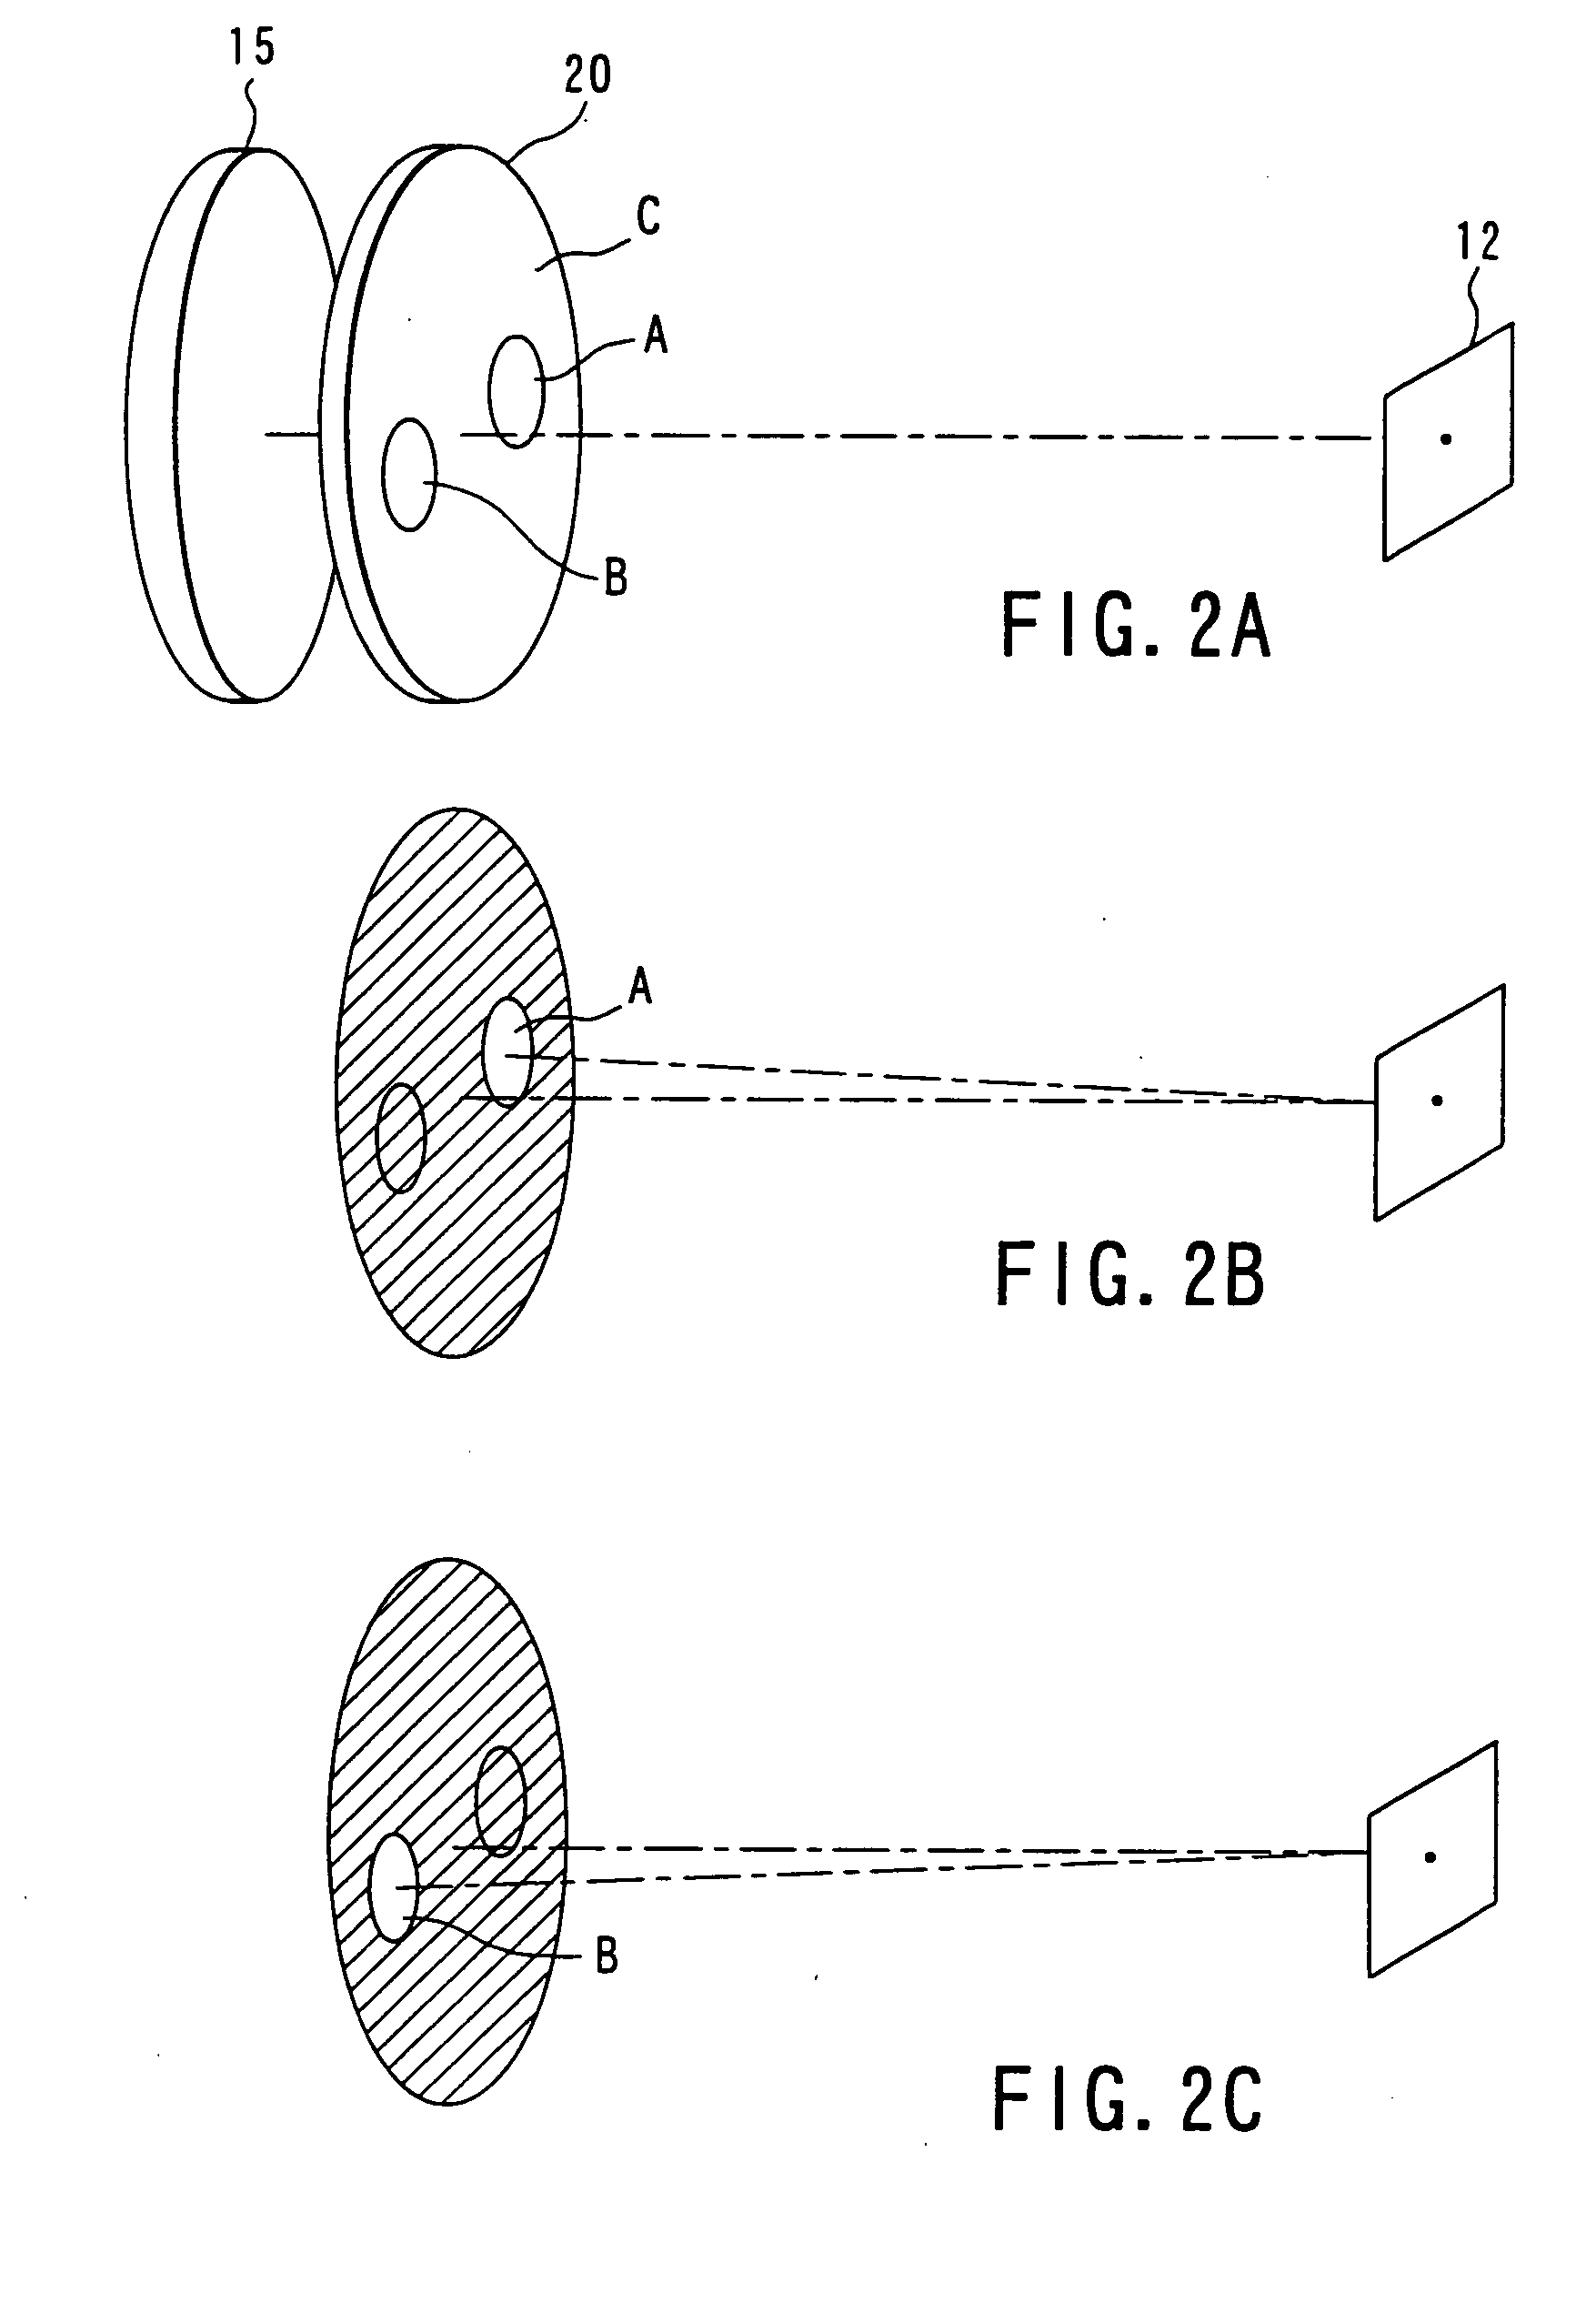 Electronic still camera with capability to perform optimal focus detection according to selected mode